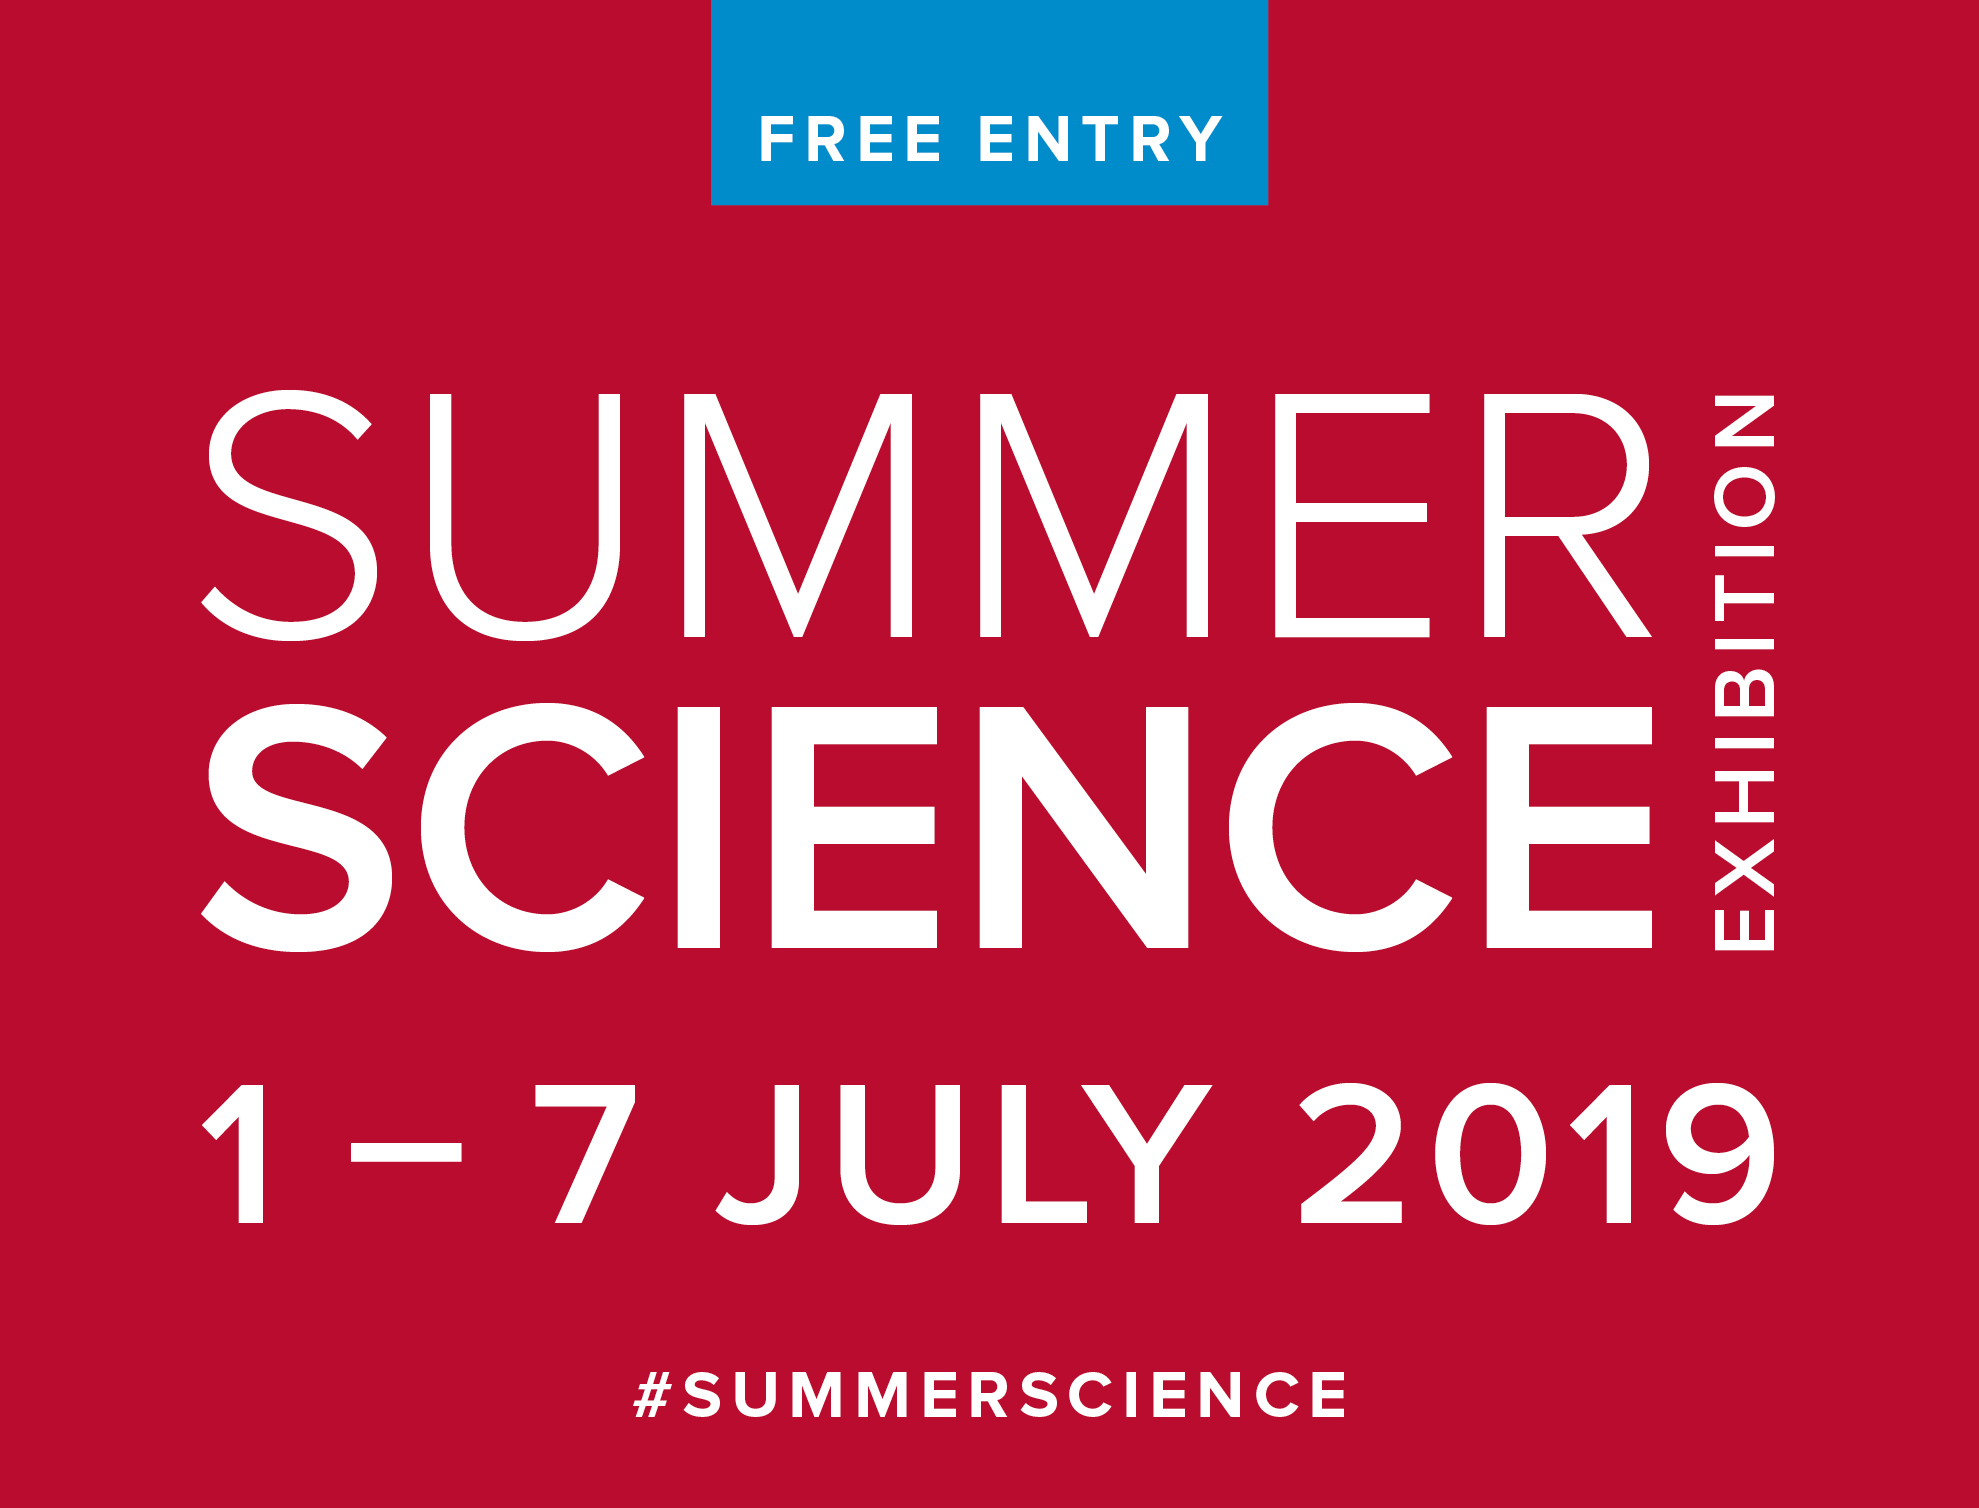 Summer Science Exhibition. 1-7 July 2019